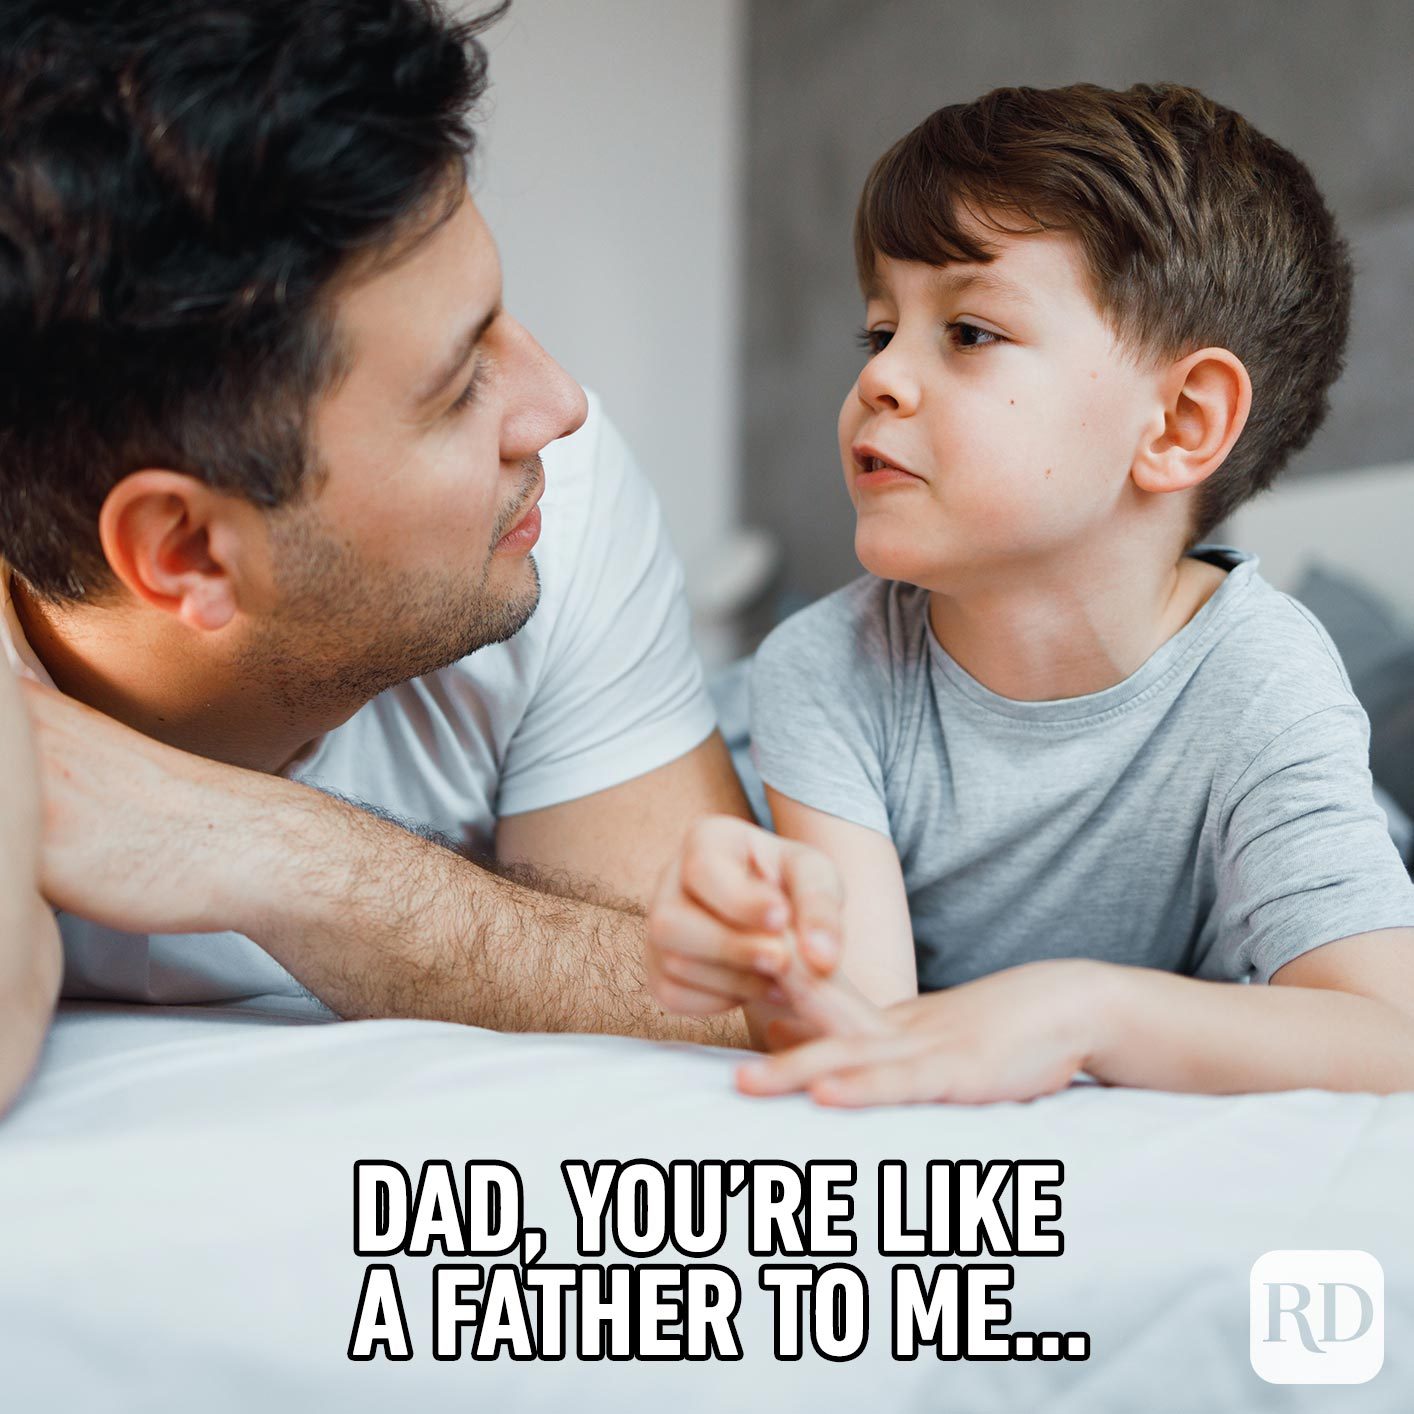 Son talking to father. Meme text: Dad, you’re like a father to me…